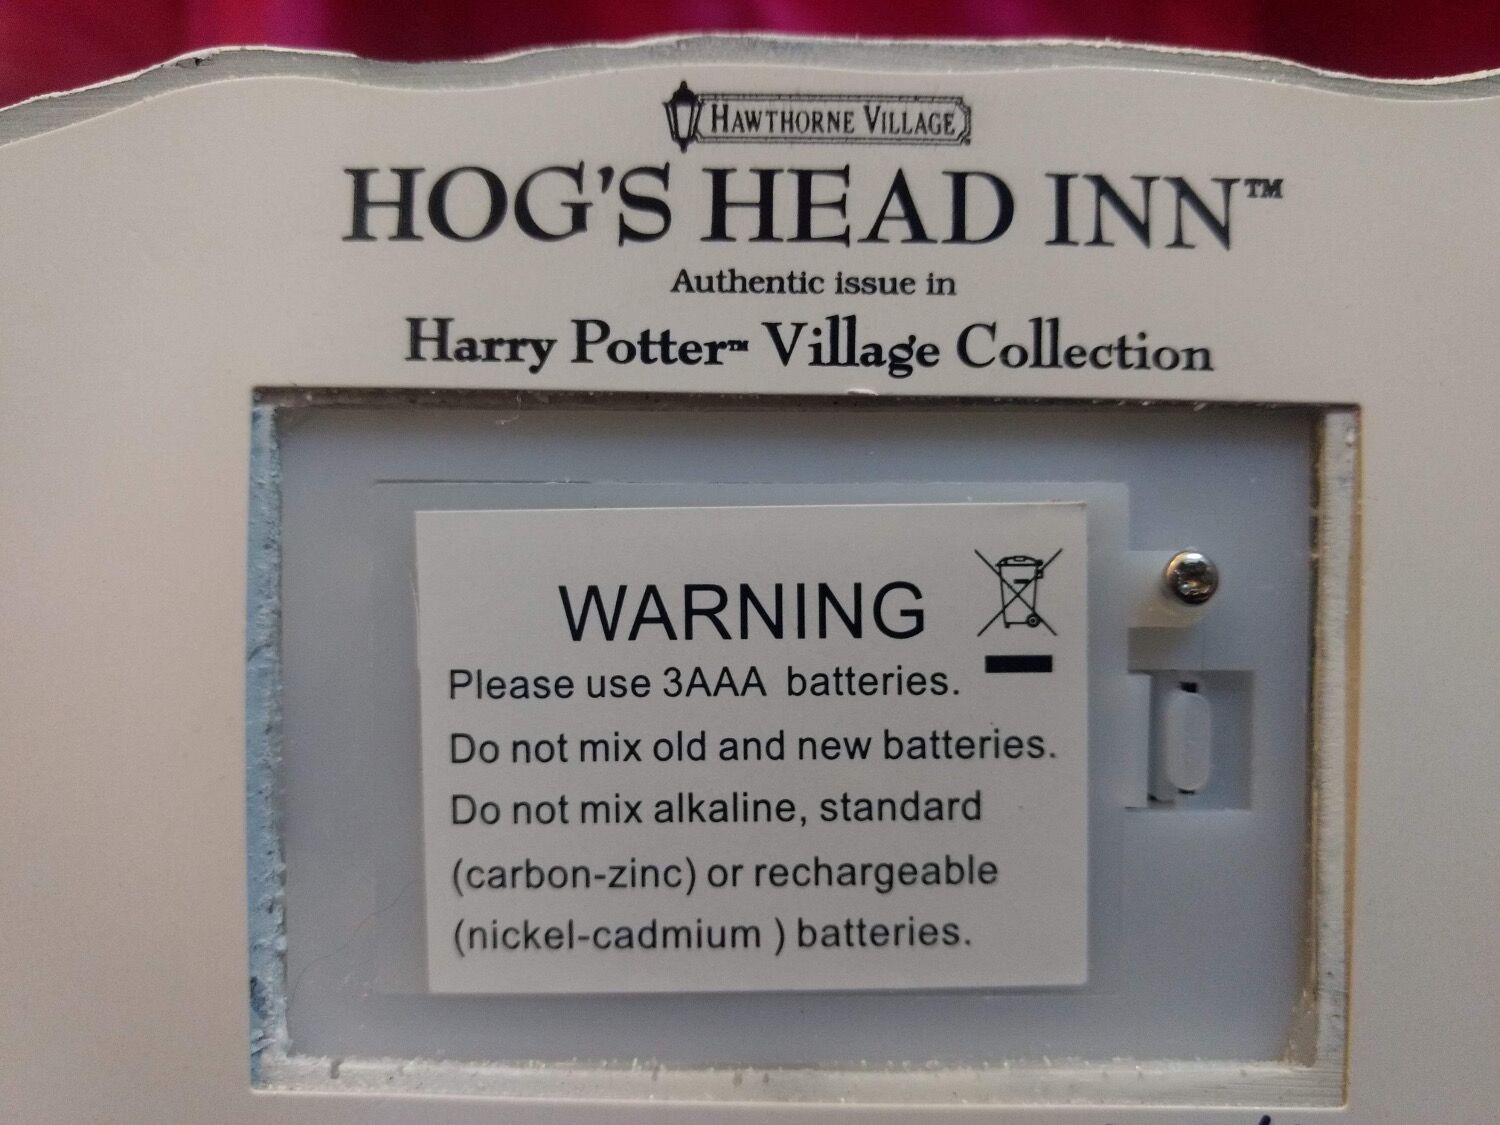 Bottom of the “HOG’S HEAD INN™” with the battery compartment